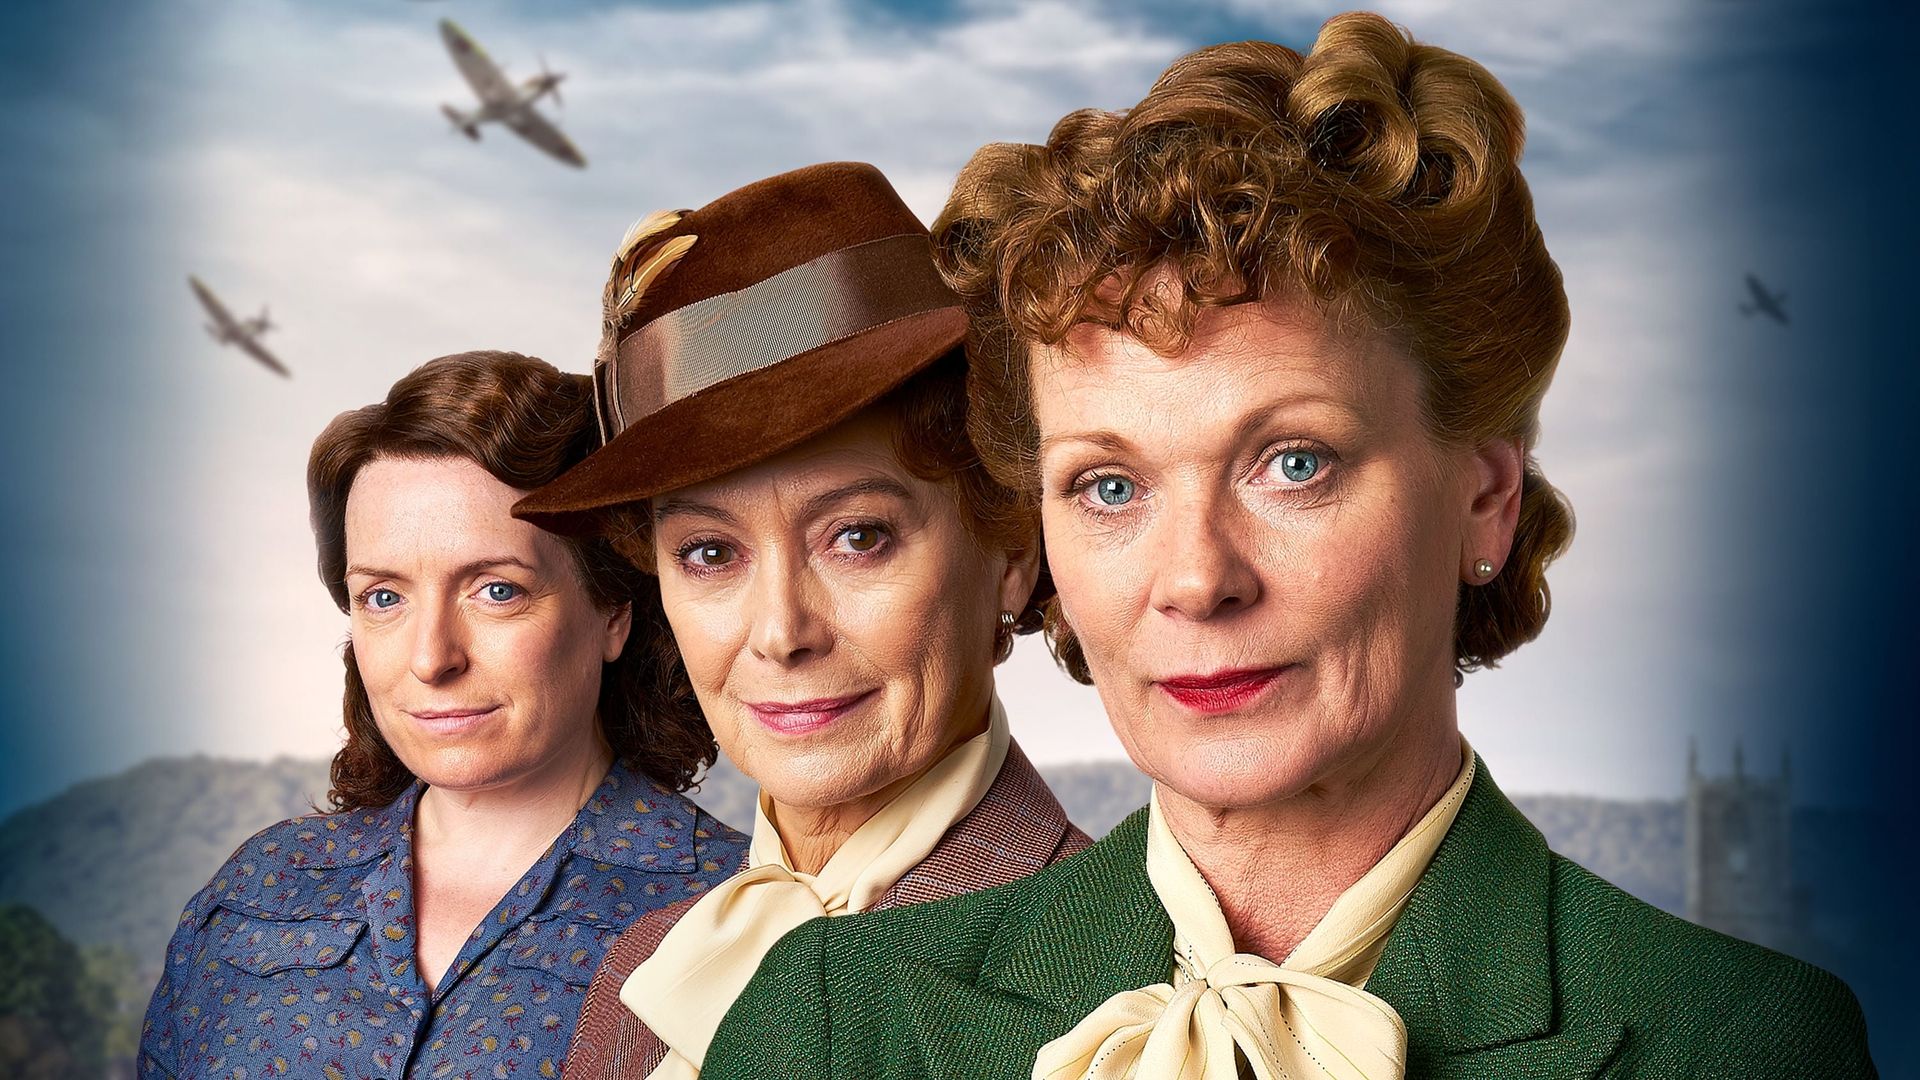 Home Fires background